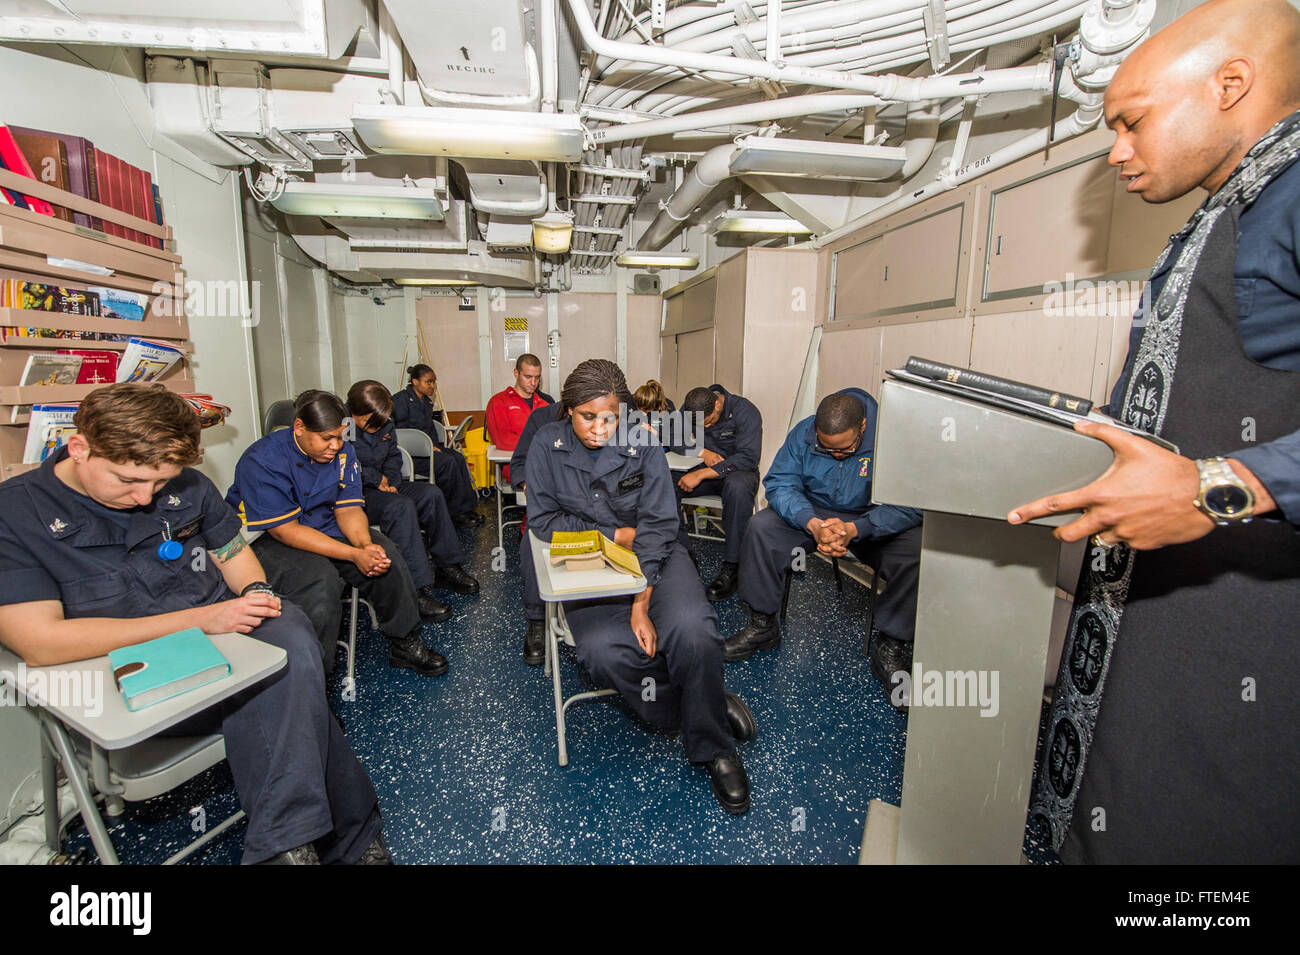 ATLANTIC OCEAN (Feb. 22, 2015) Lt. j. g. Marquis Jones, originally from Fort Lauderdale, leads Sailors in Sunday Mass aboard USS Laboon (DDG 58) Feb. 22, 2015. Laboon, an Arleigh Burke-class guided-missile destroyer home ported in Norfolk, is conducting naval operations in the U.S. 6th Fleet area of operations in support of U.S. national security interests in Europe. Stock Photo